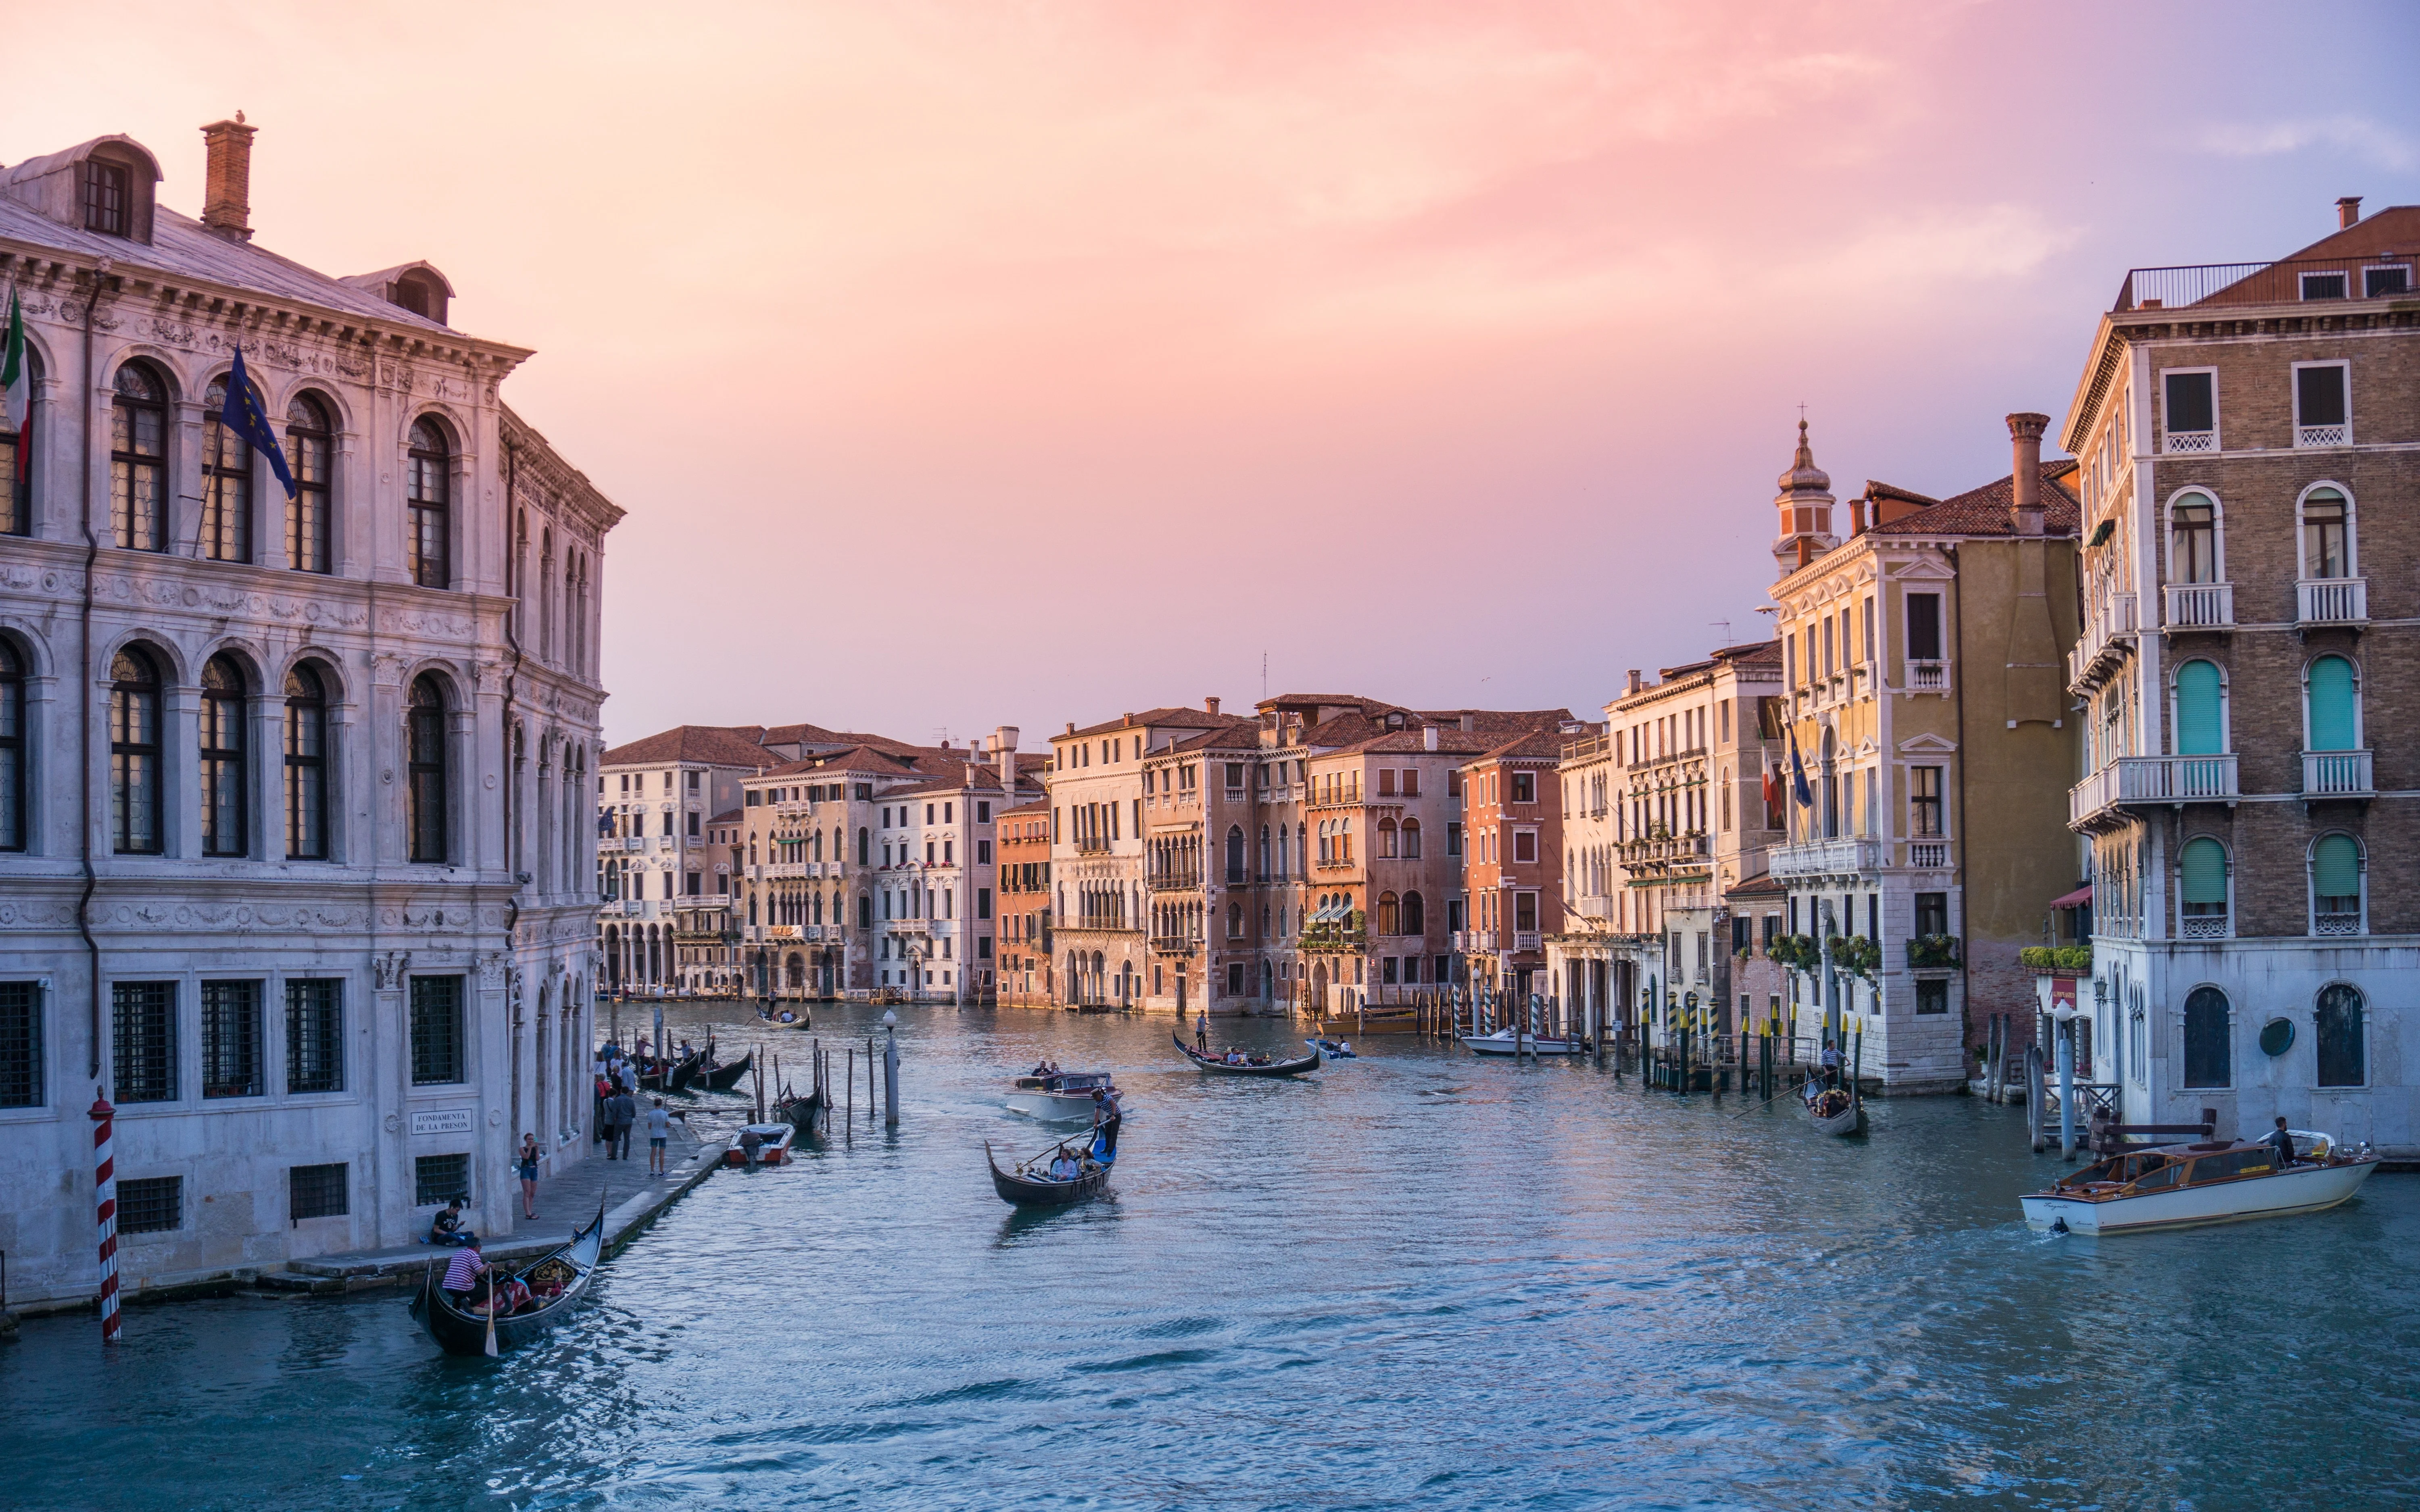 Venice is one of the classic destinations in Italy and almost unrivalled in terms of beauty. Read our guide to the best places in Italy